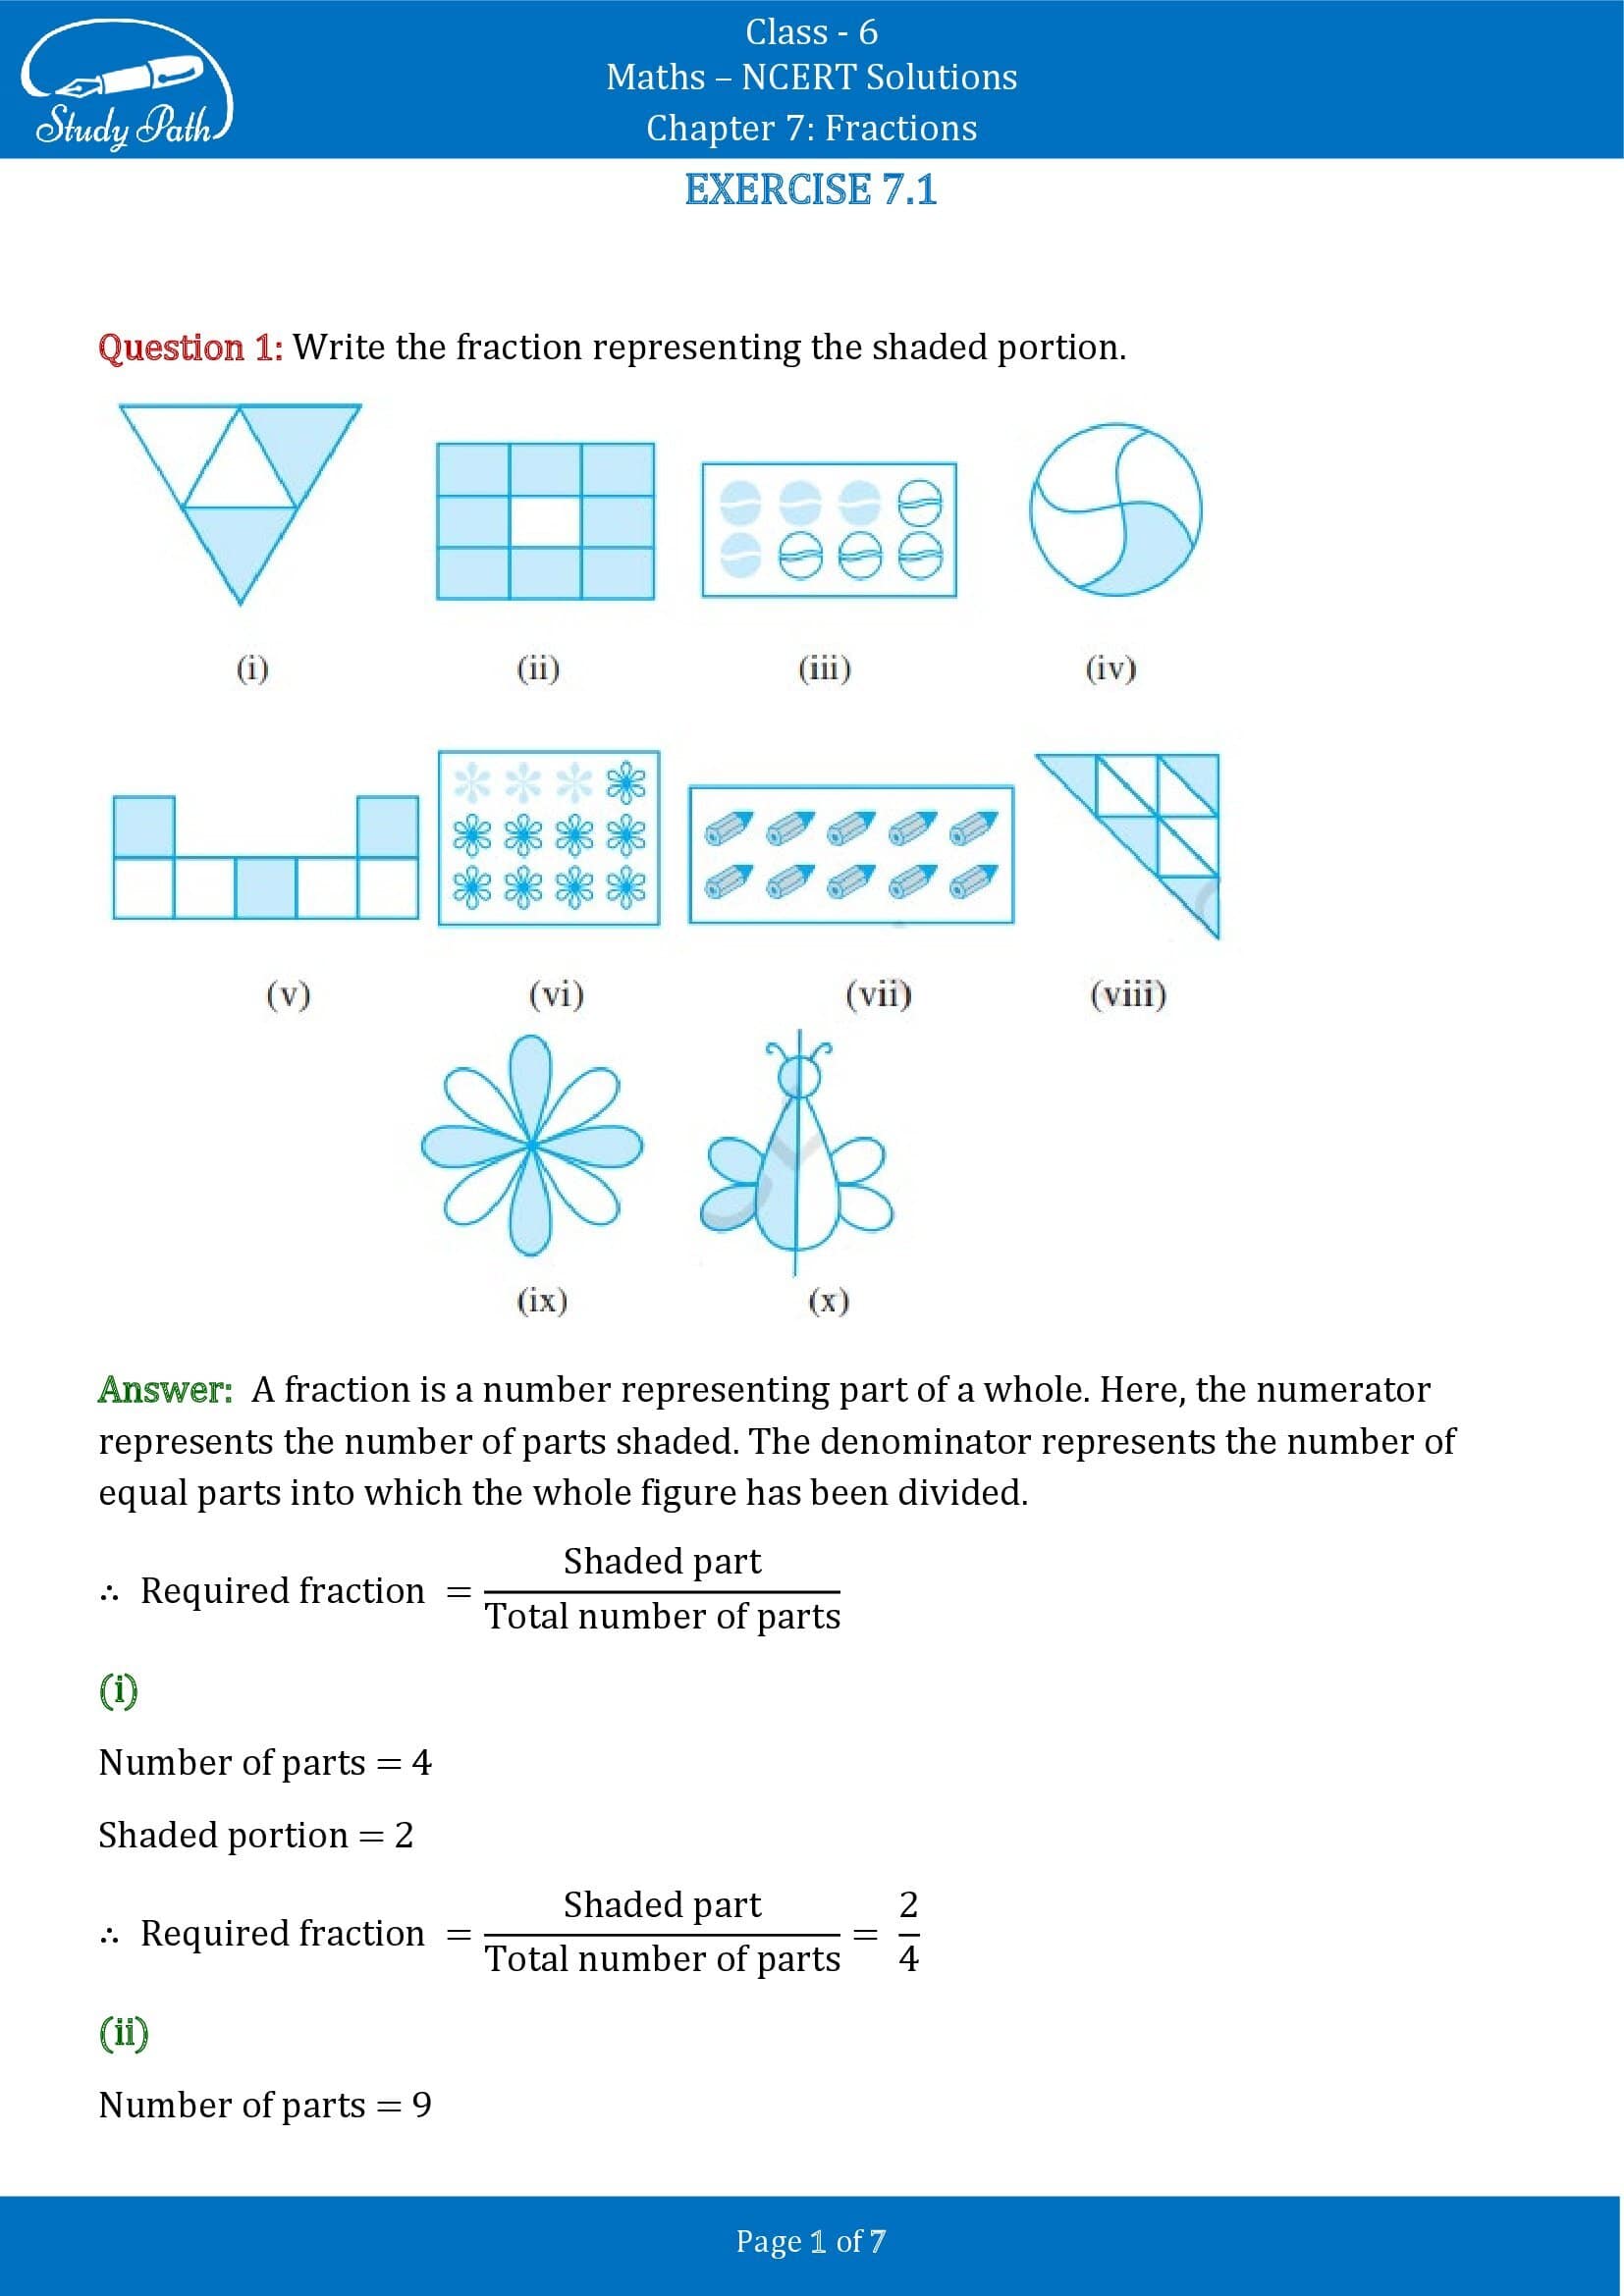 NCERT Solutions for Class 6 Maths Chapter 7 Fractions Exercise 7.1 00001